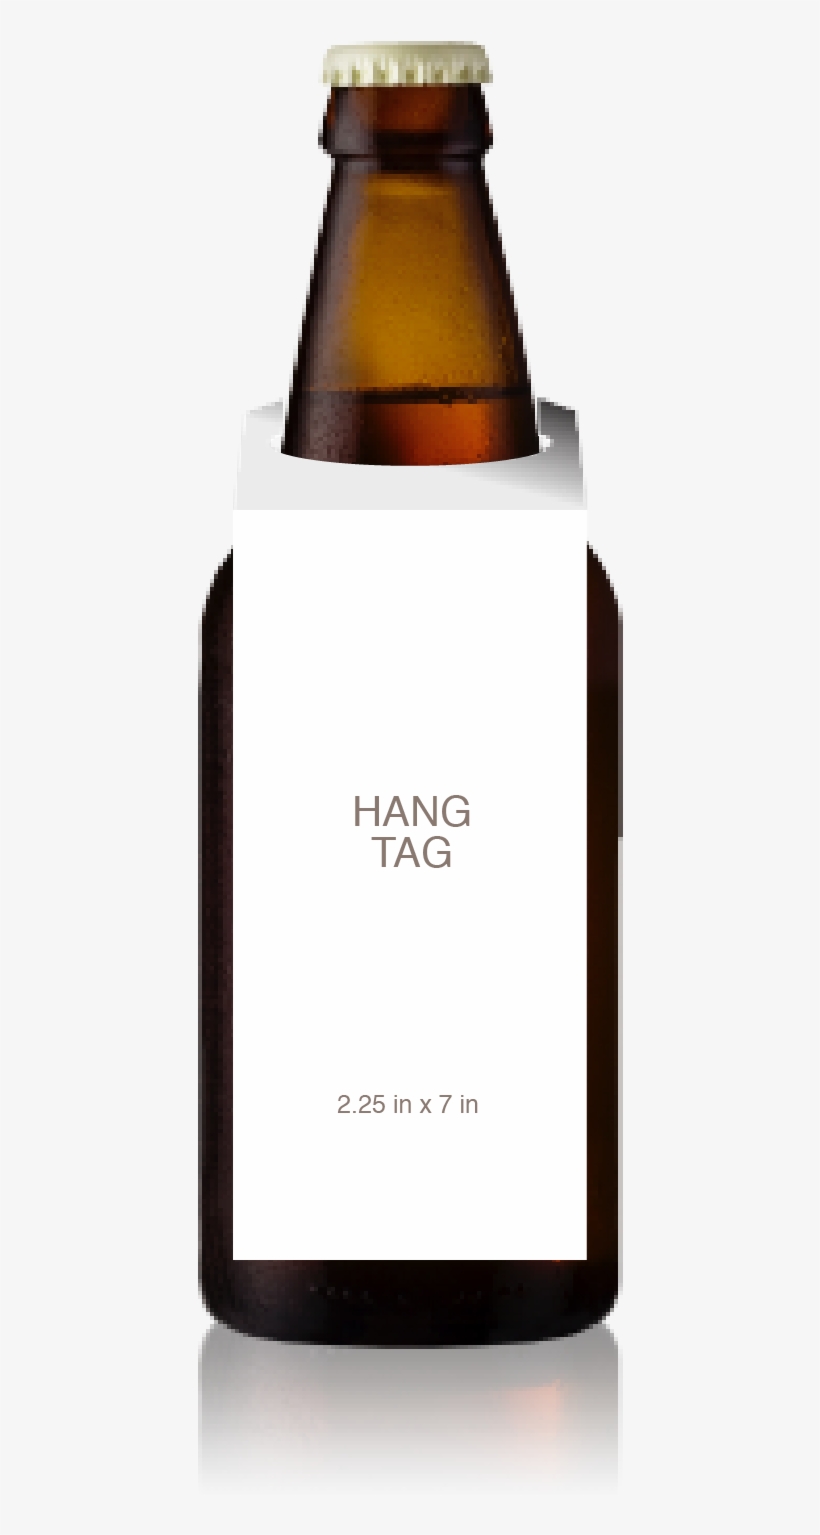 Short Bottle With A Blank Hangtag From Crushtag - Beer Bottle, transparent png #7781077